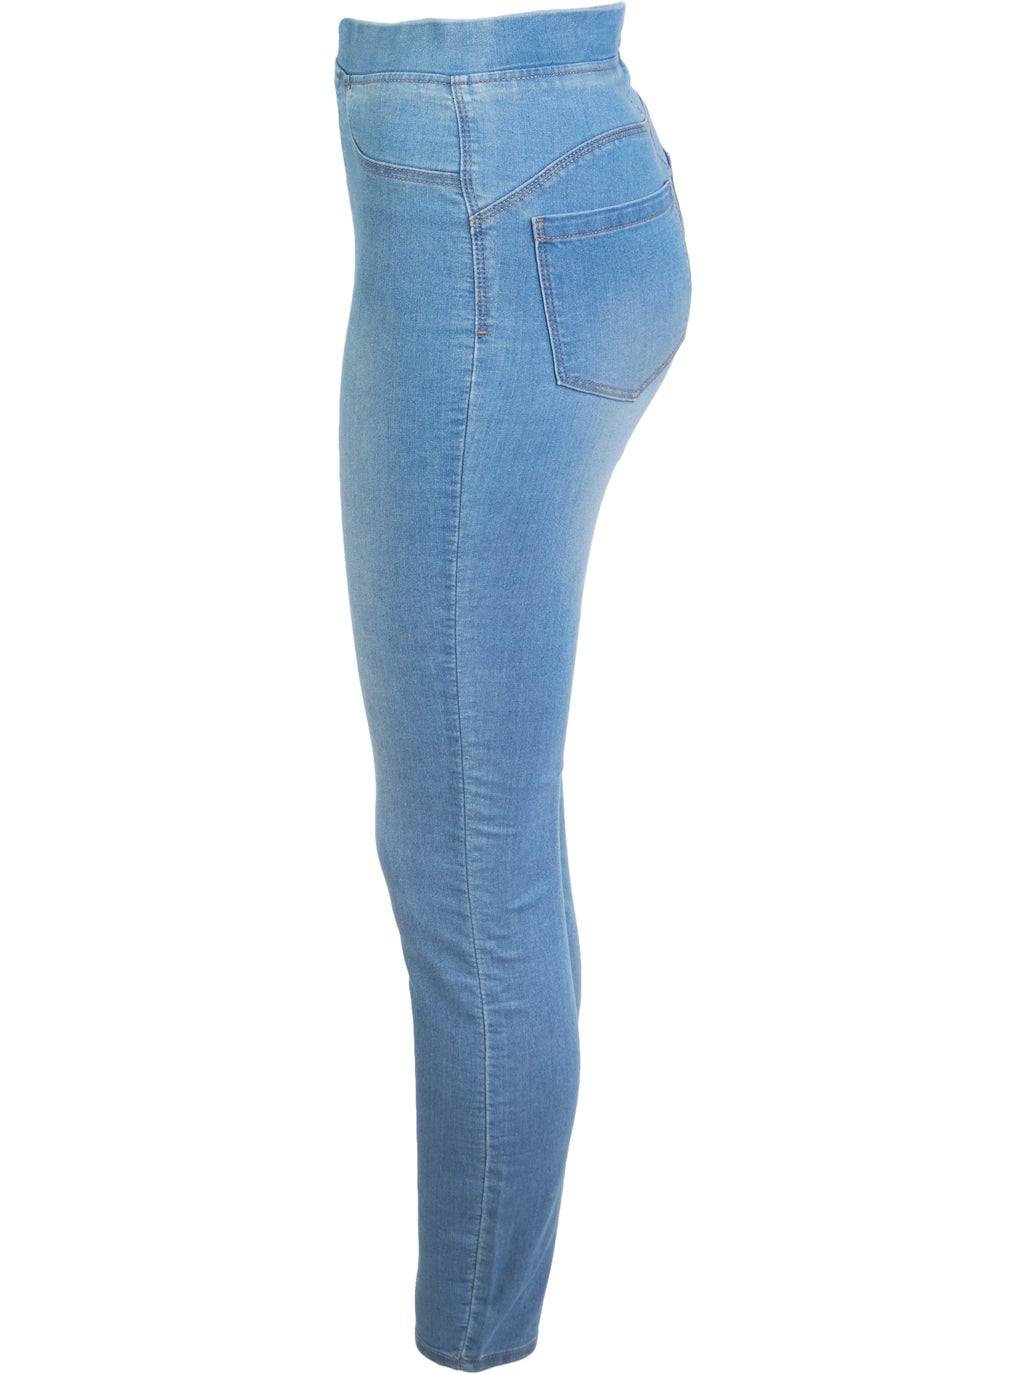 Women's High Rise Signature Jegging in Light Wash